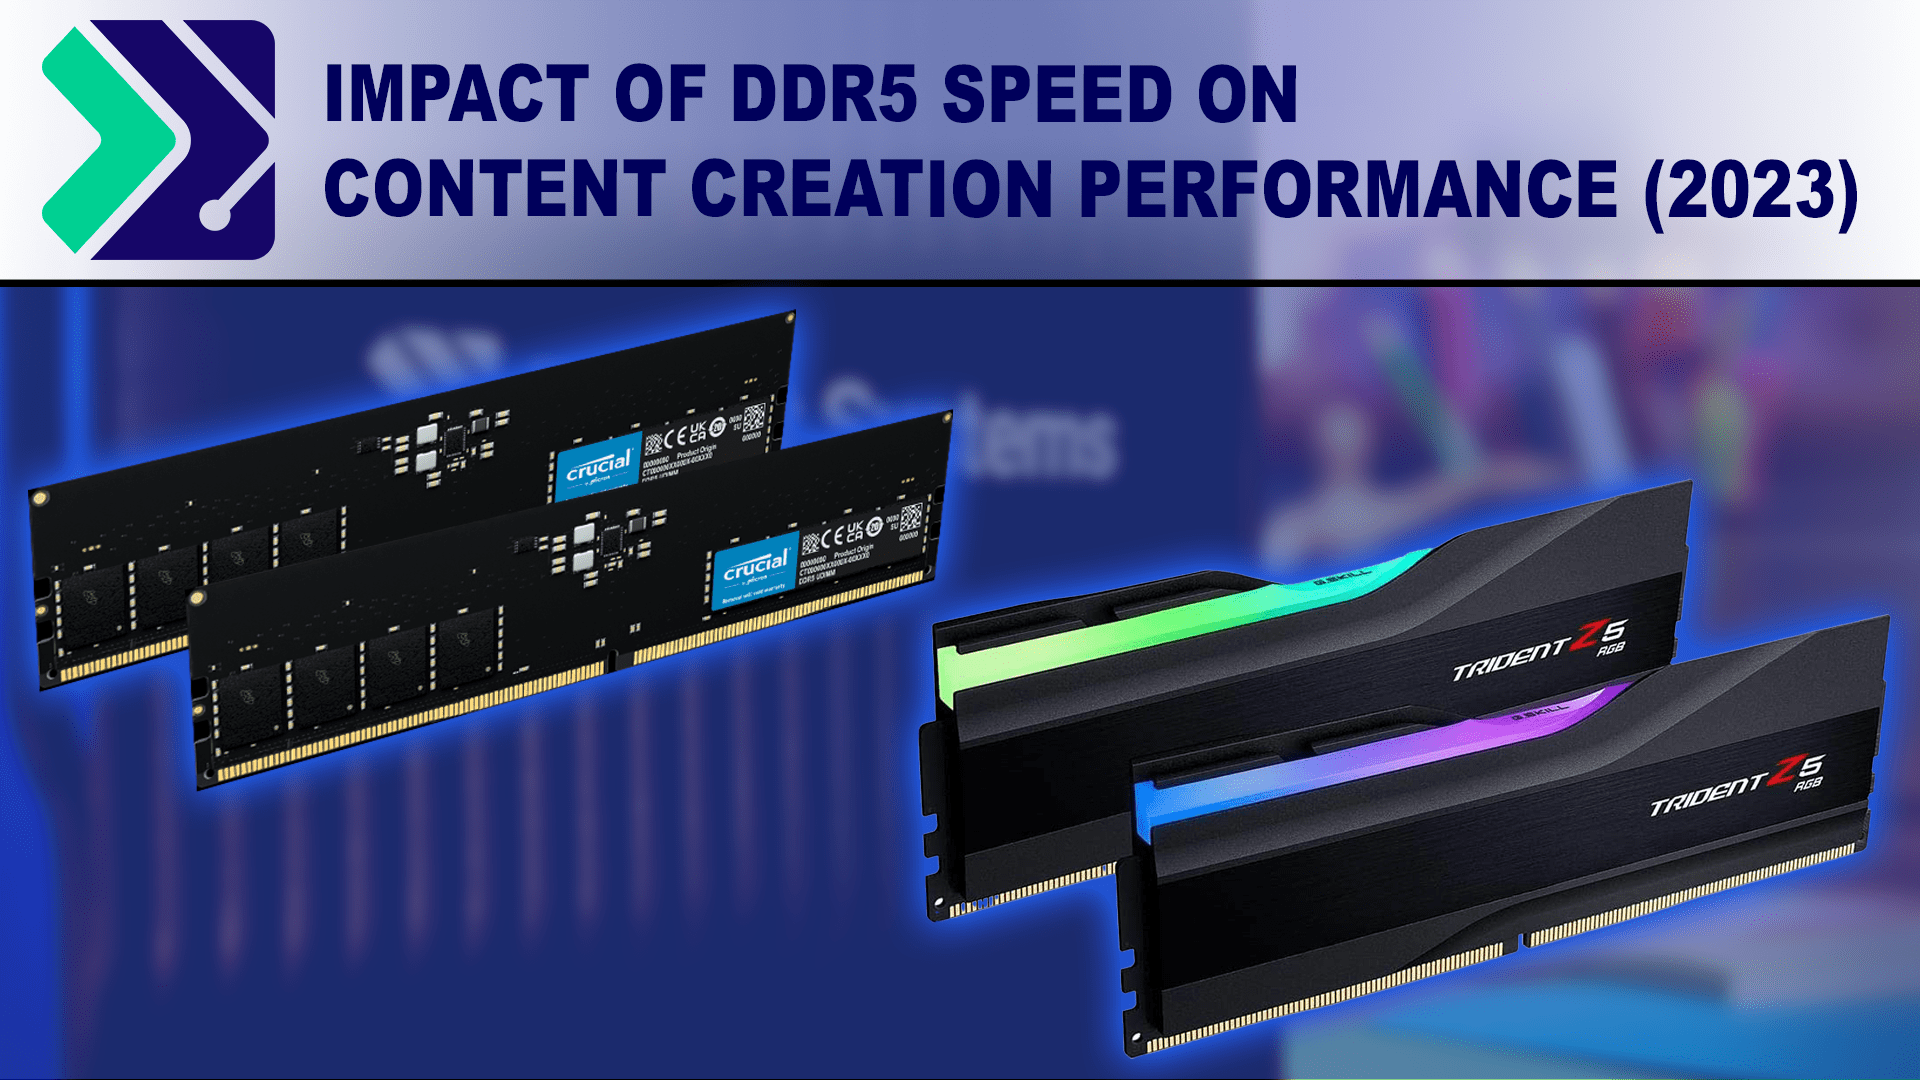 DDR4 vs DDR5: Is it Worth the Upgrade?